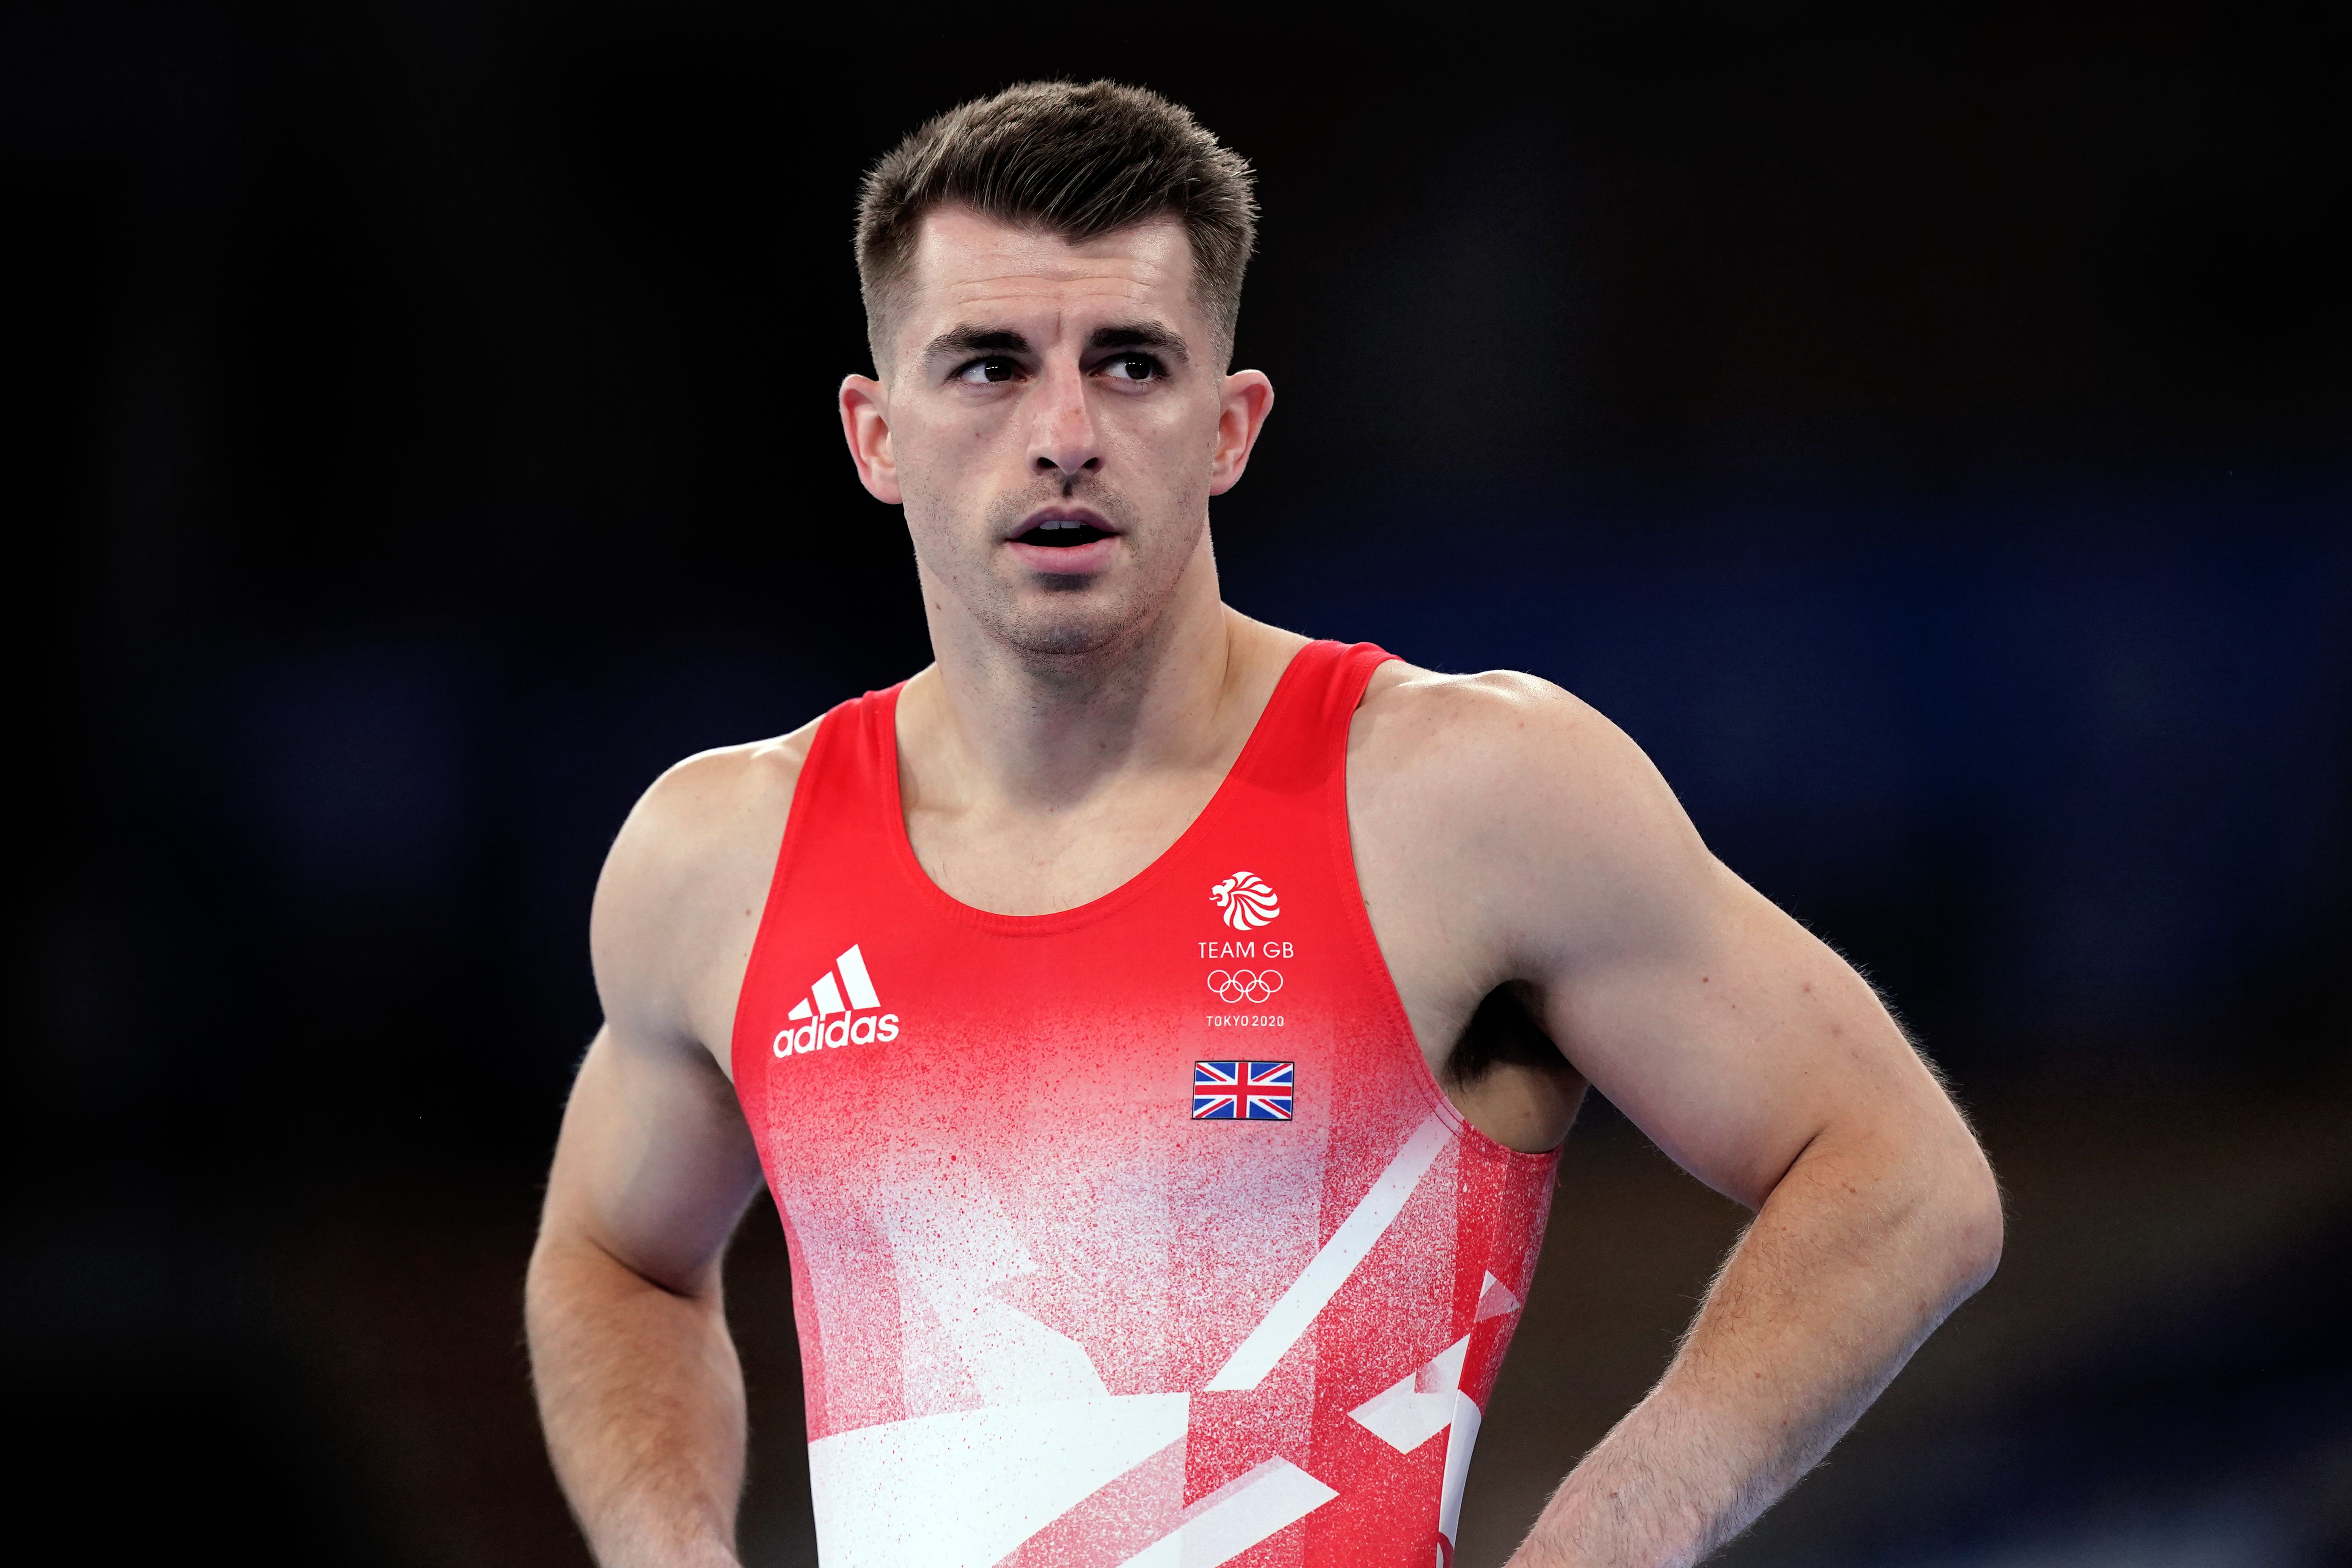 Max Whitlock is set to make his first global outing since the delayed Tokyo Olympics in 2021 (Mike Egerton/PA)